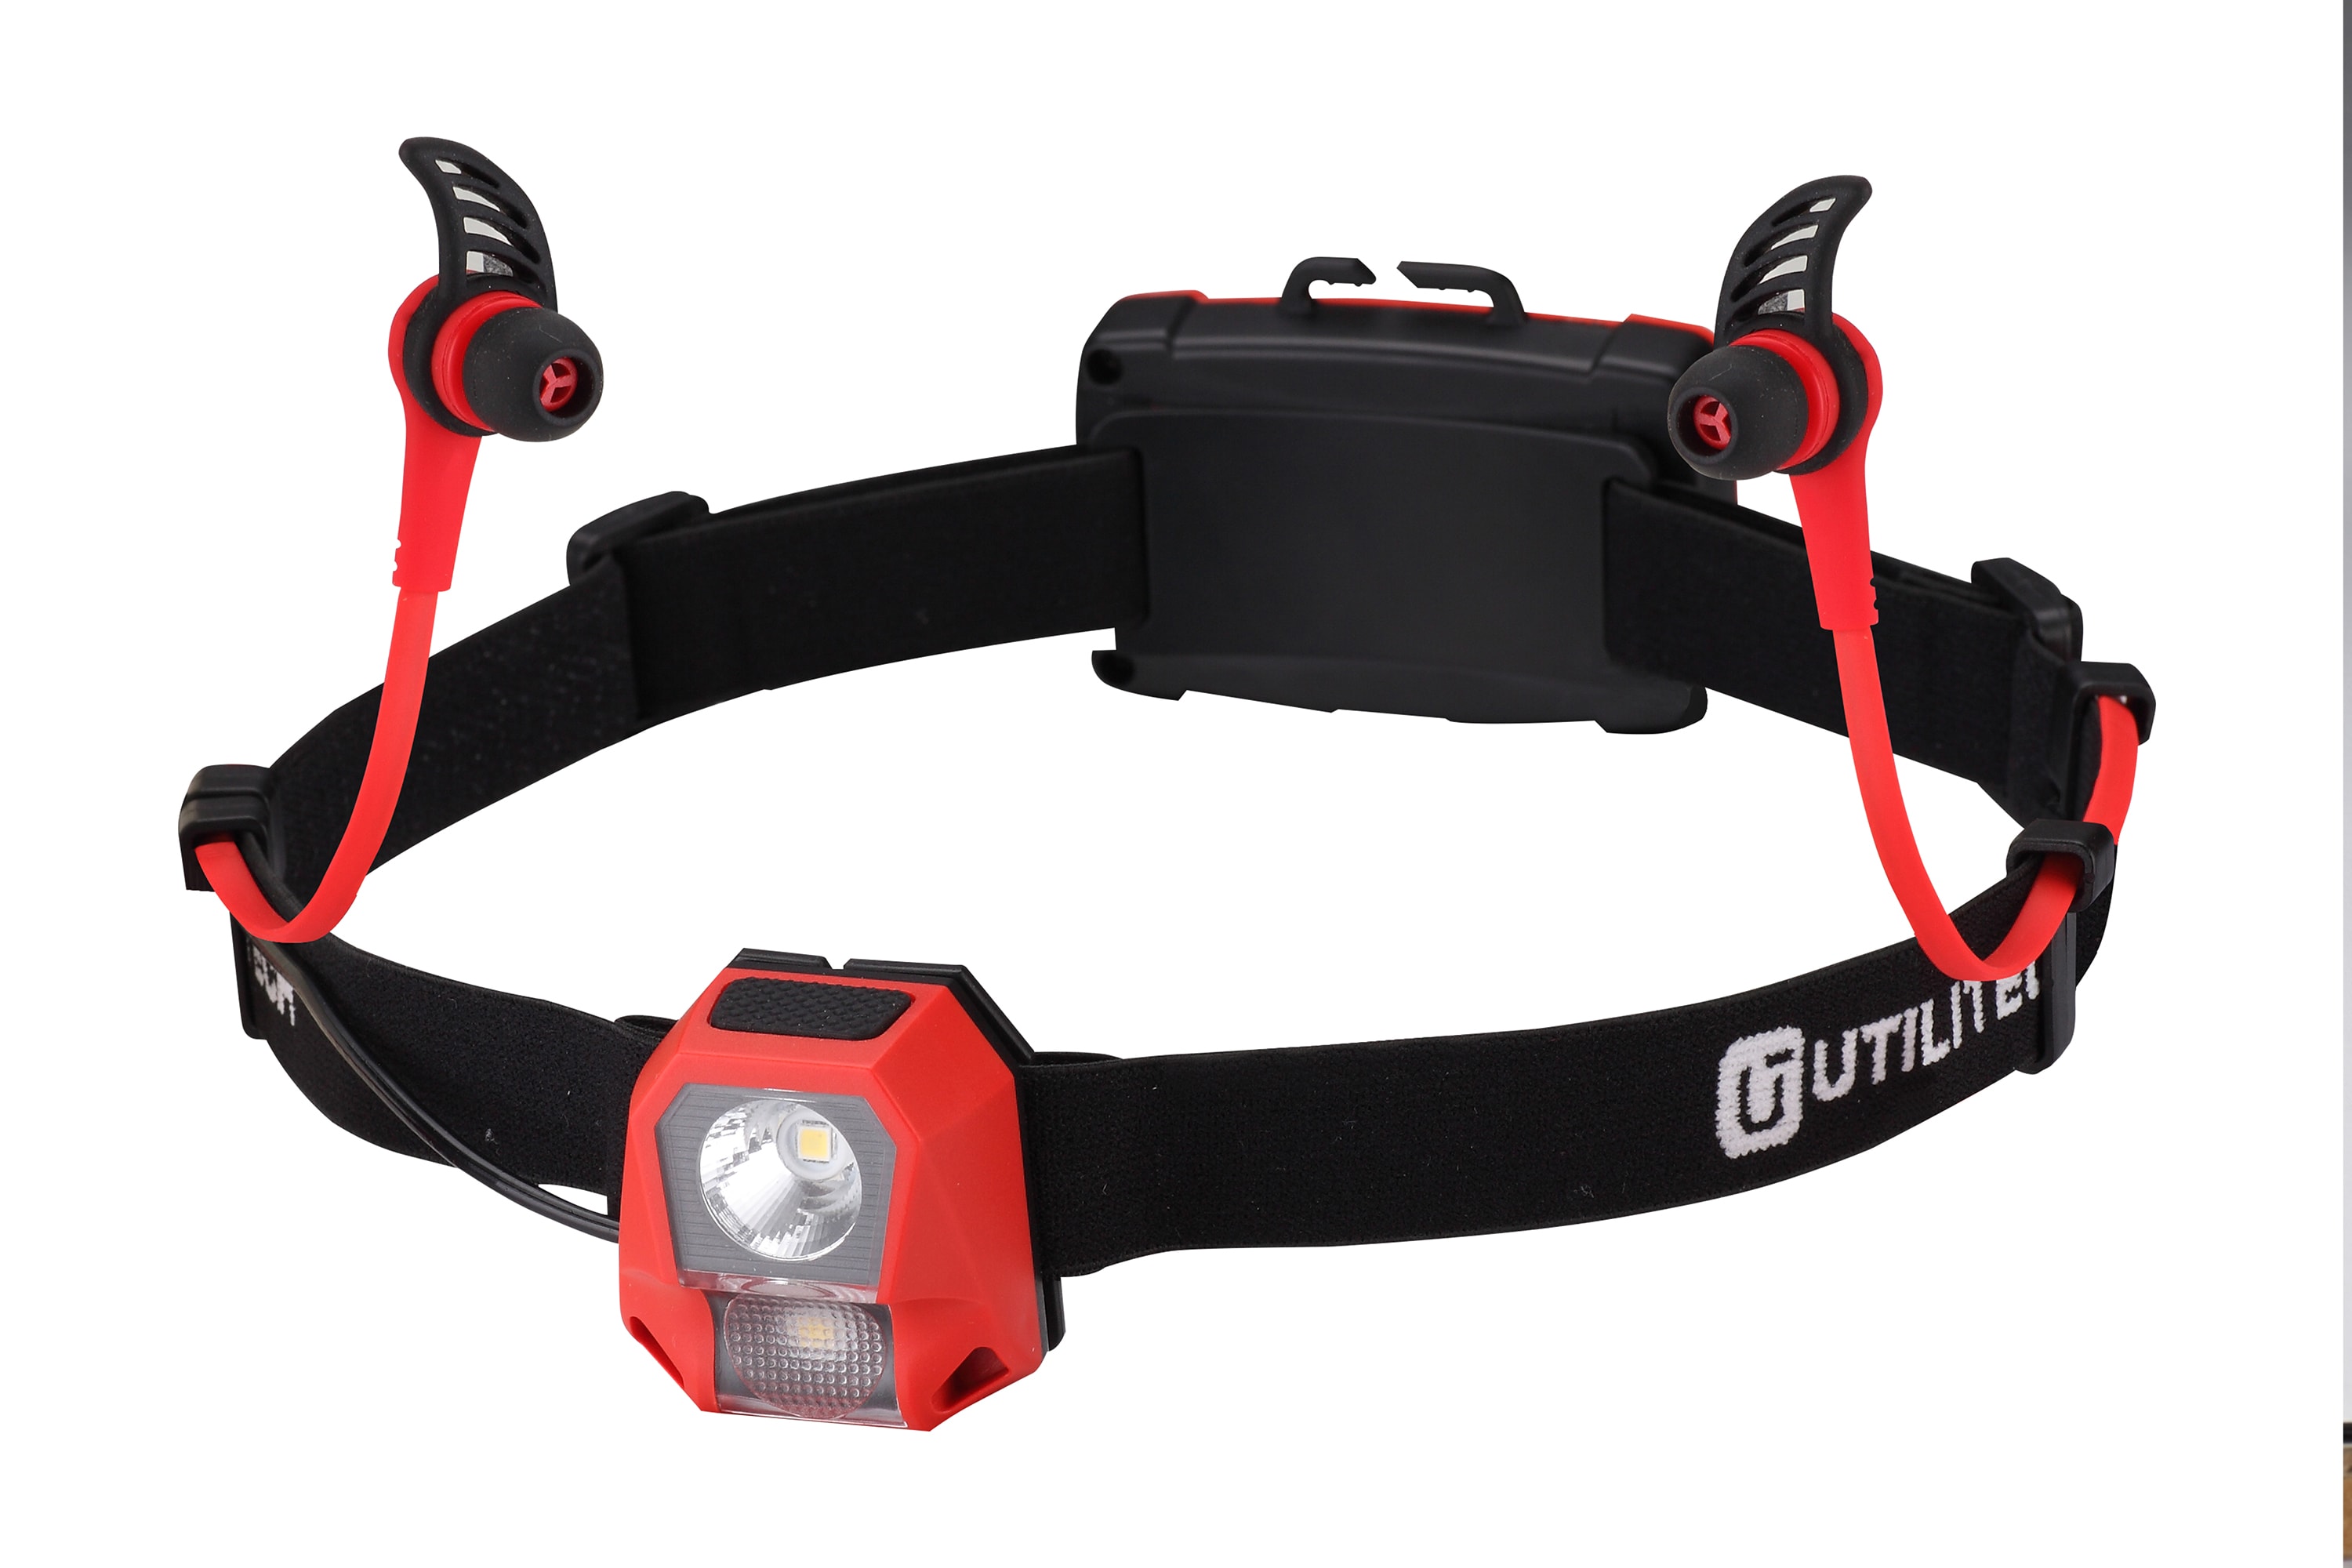 Utilitech 200-Lumen LED Rechargeable Headlamp (Battery Included) at